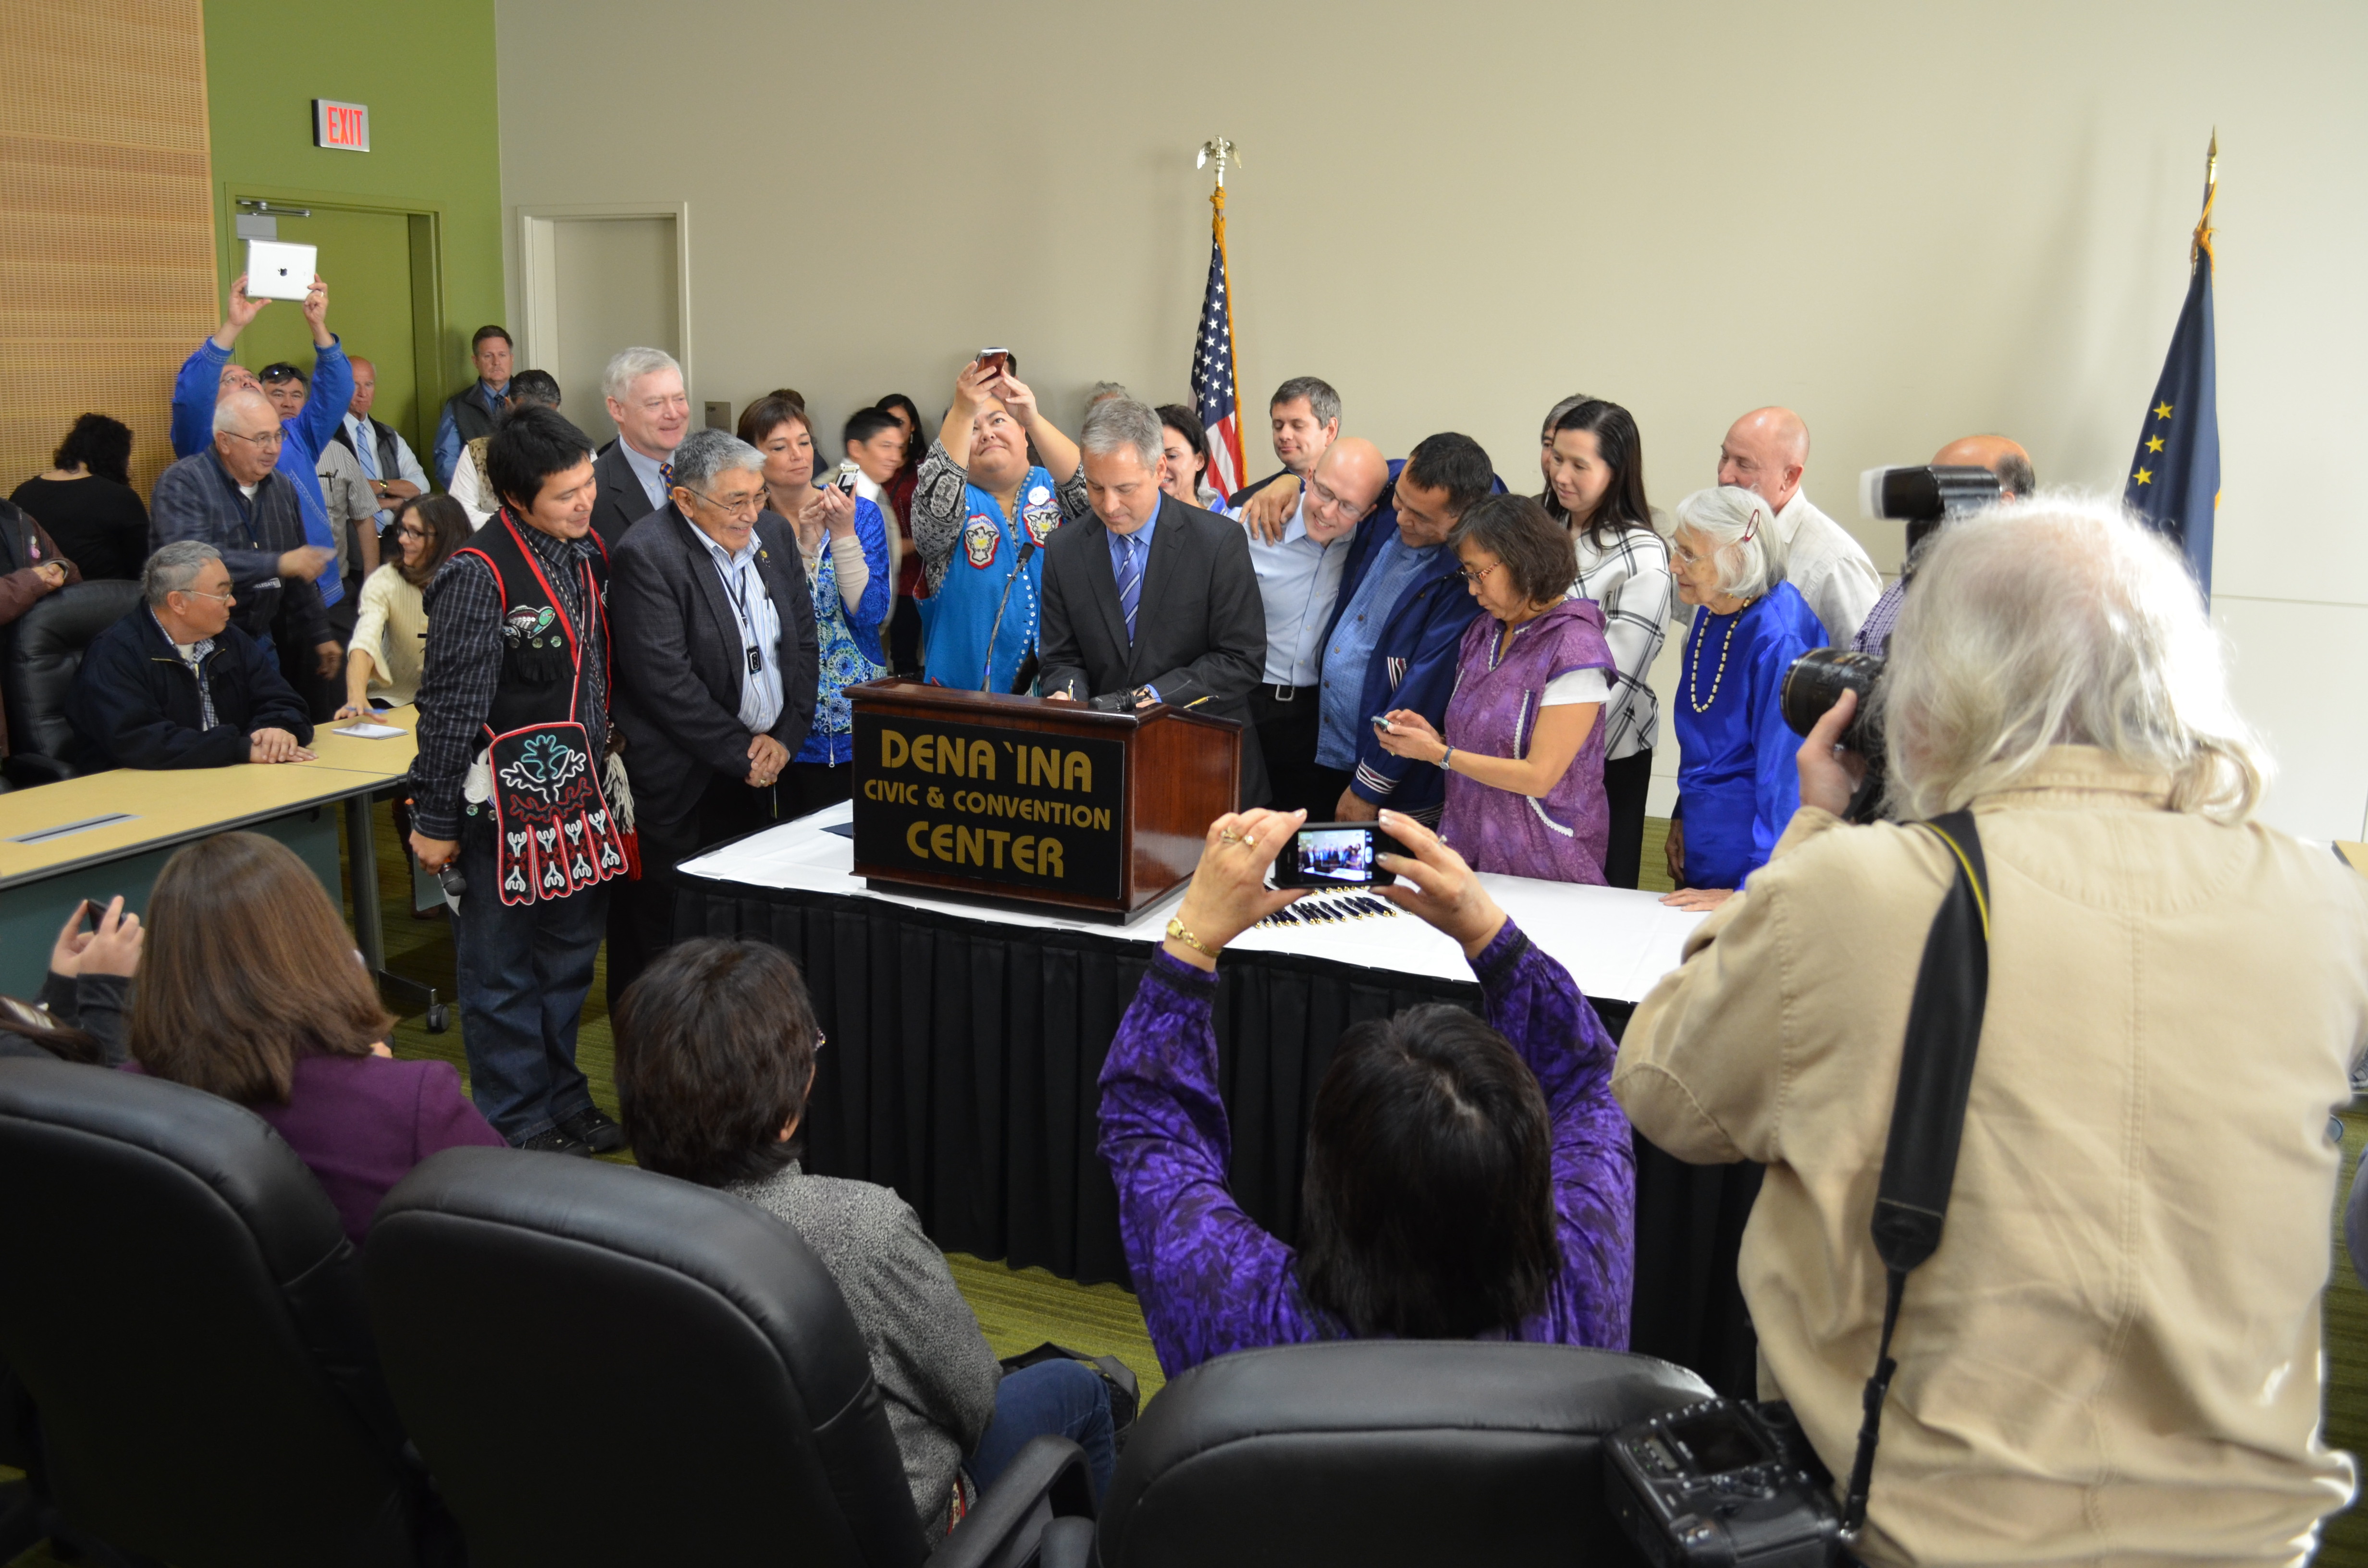 Gov. Sean Parnell signs HB 216 at the 2014 Alaska Federation of Natives Convention. The bill makes Alaska's Native languages official state languages. Looking on as the governor signs is Tlingit language teacher Lance Twitchell, Rep. Bennie Nageak, Rep. Charisse Millett, Lt. Gov. Mead Treadwell, First Alaskans Institute President Liz Medicine Crow, Sen. Lesil McGuire, Rep. Chris Tuck, Rep. Jonathan Kreiss-Tomkins, Rep. Doug Isaacson, Rep. Les Gara and others.